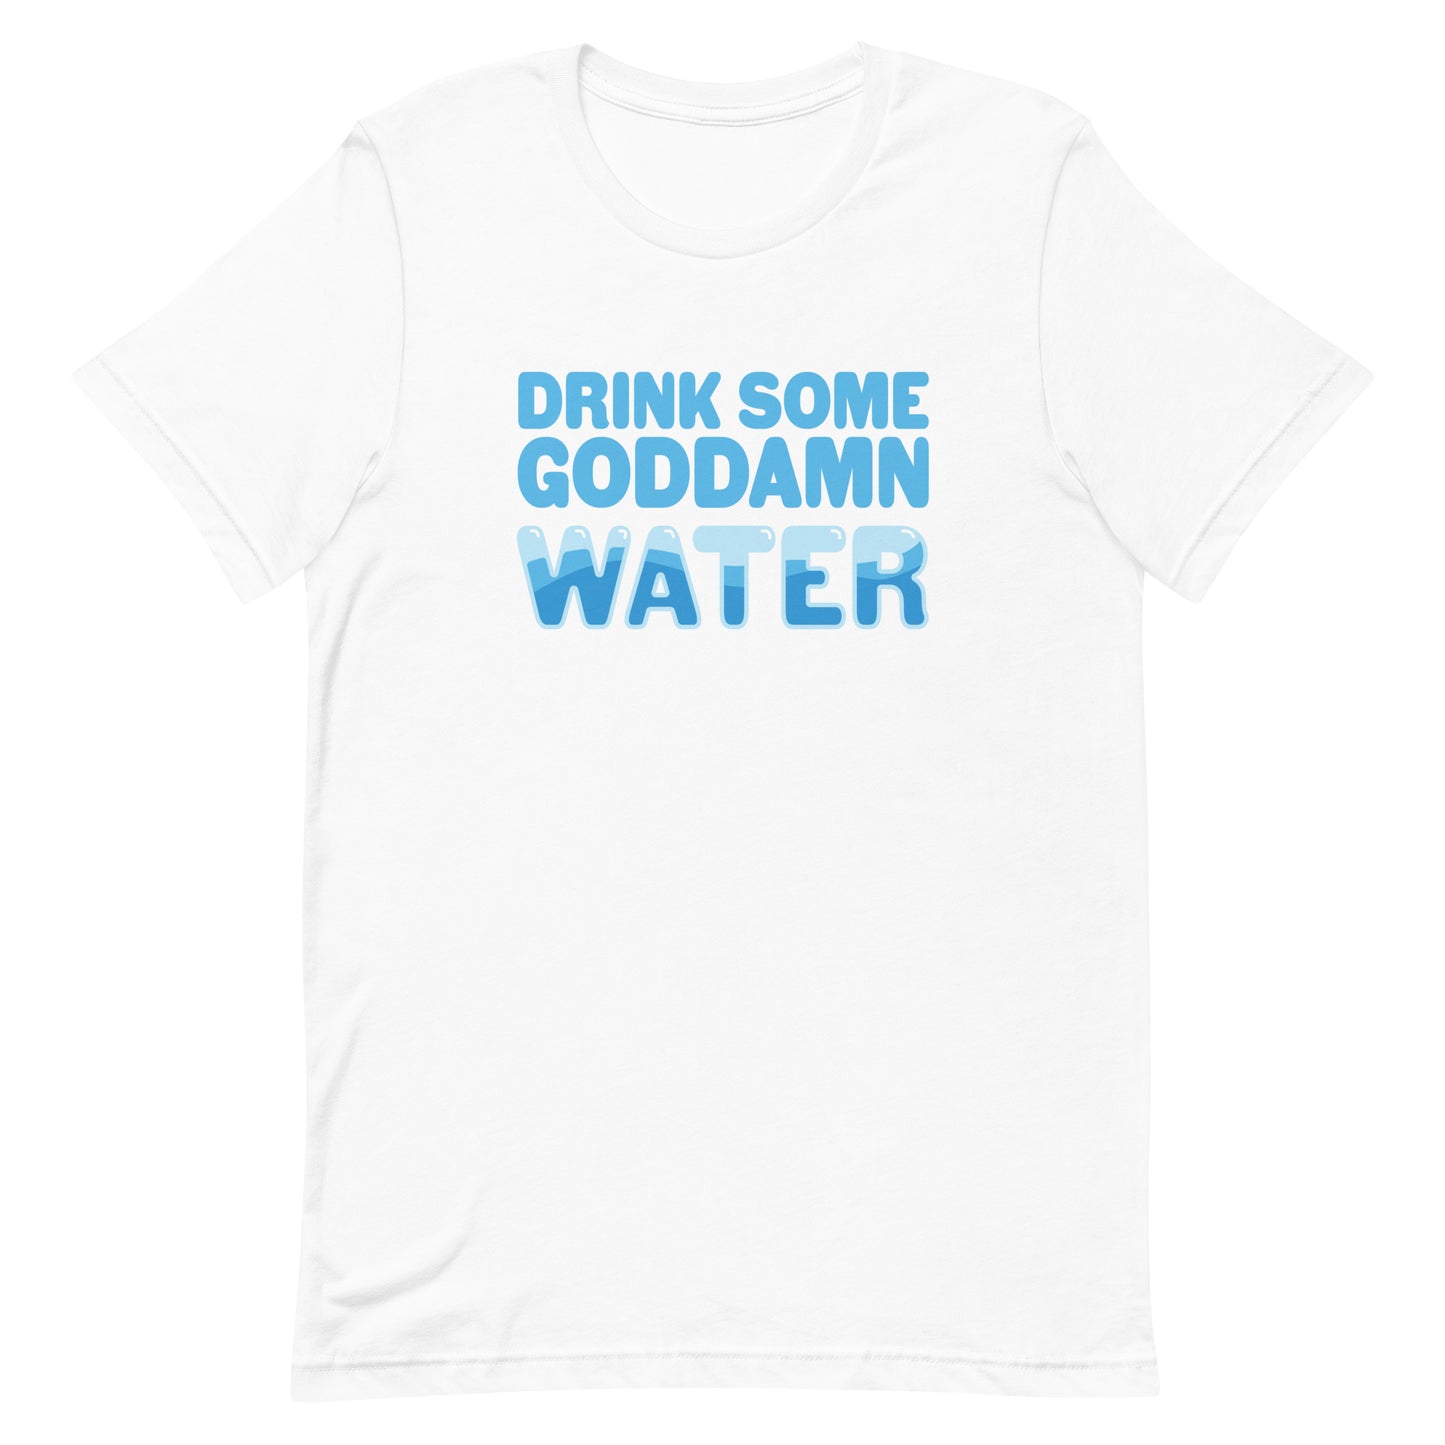 A white crewneck t-shirt with blue bubble text that reads "Drink some goddamn water"